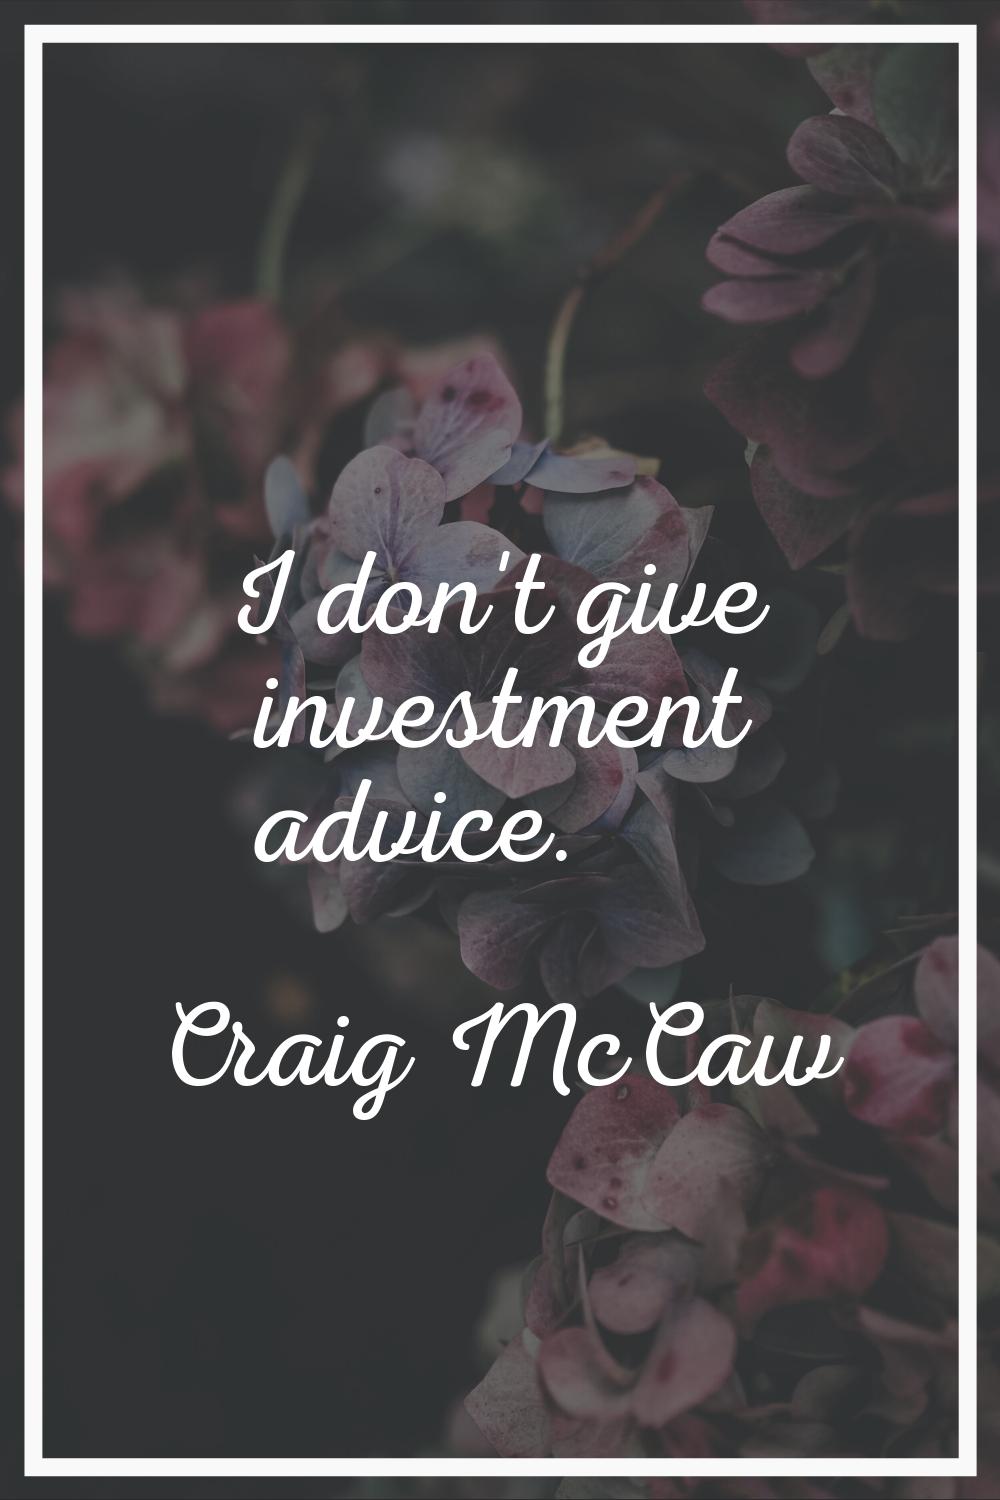 I don't give investment advice.